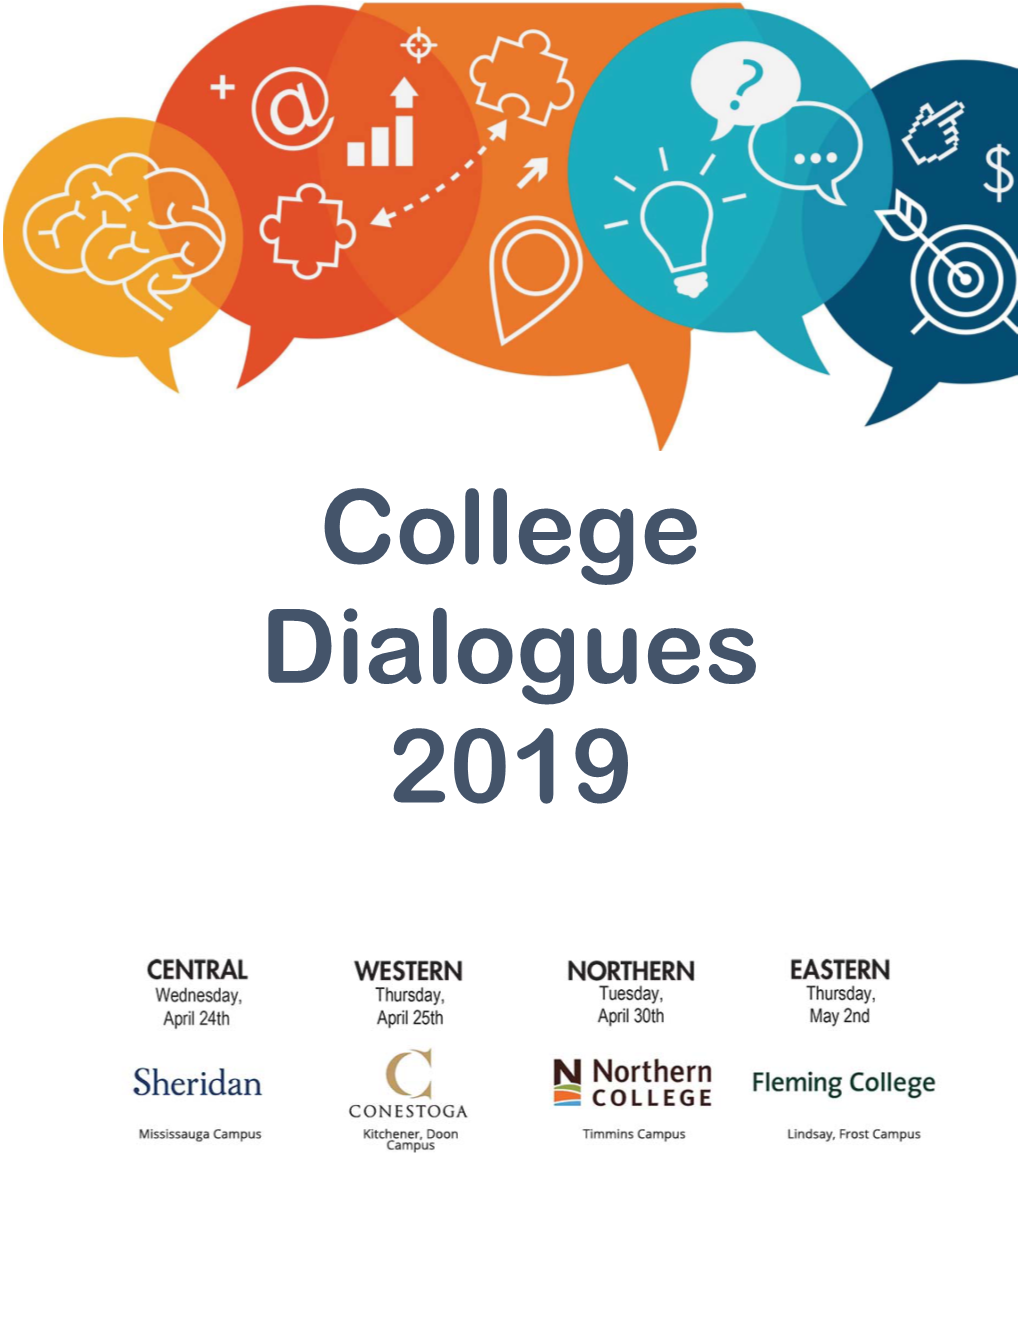 College Dialogues 2019